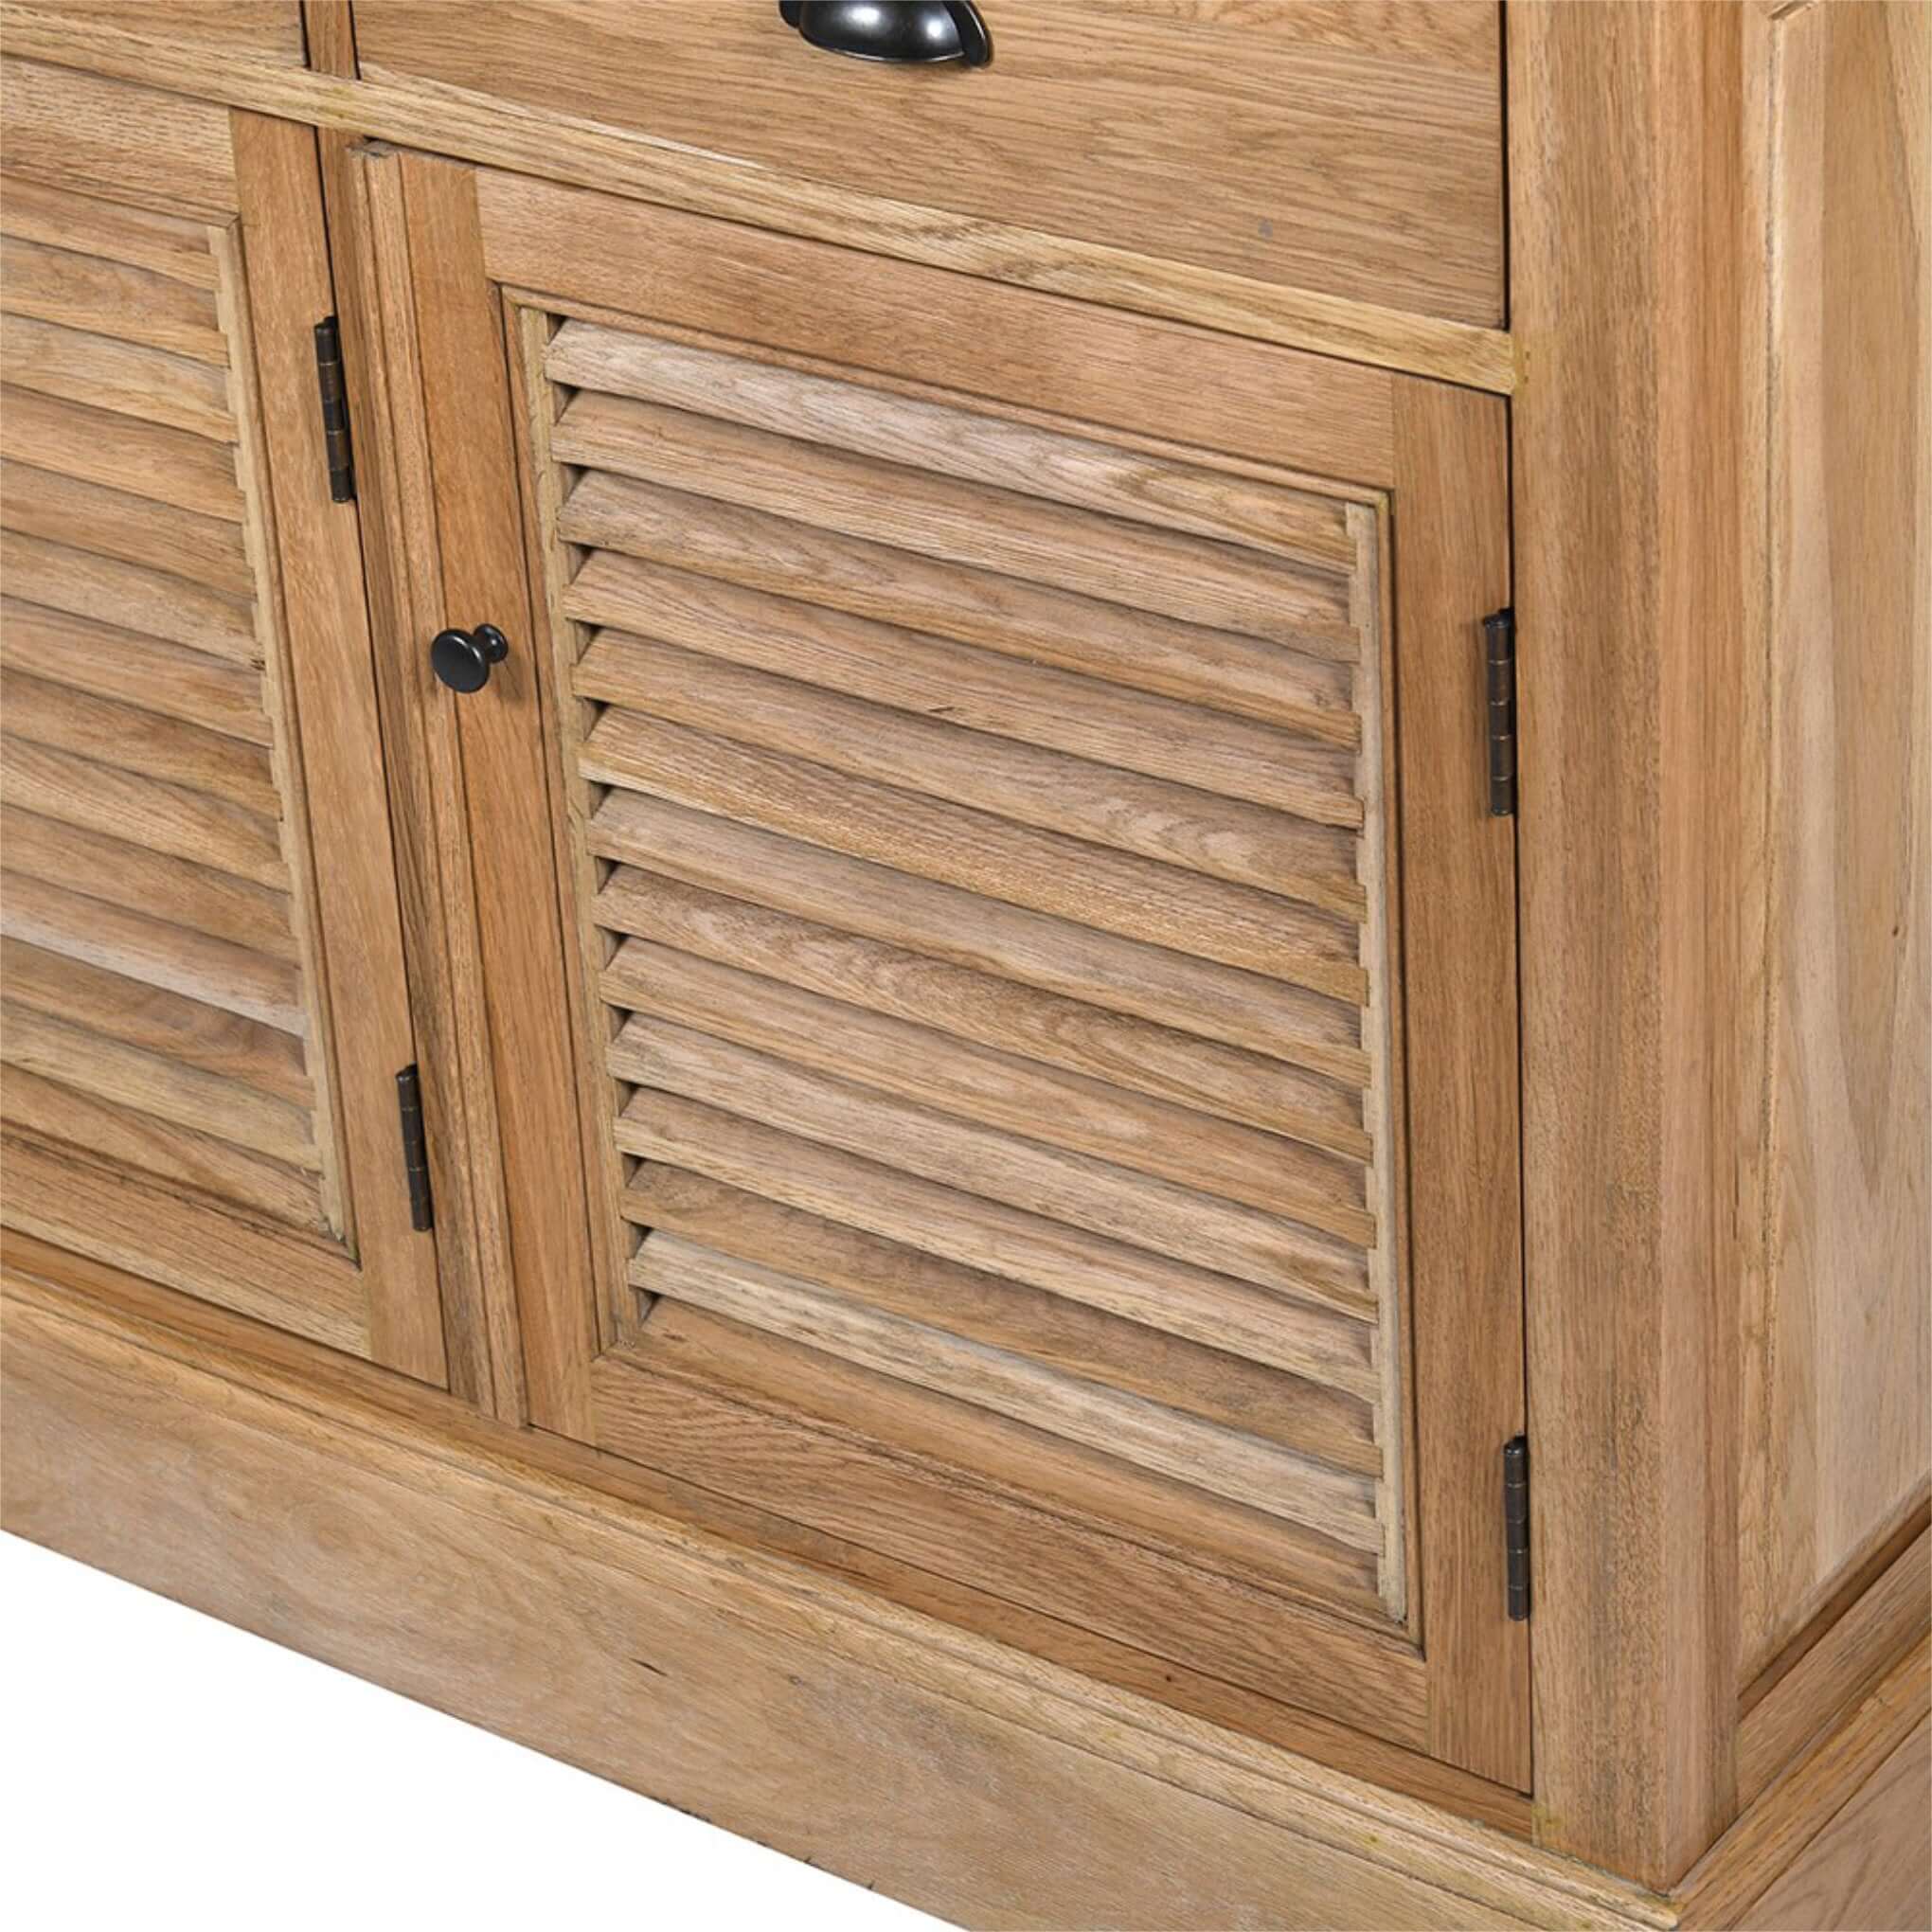 Escapology Weathered Oak 3-Door Sideboard With Drawers - escapologyhome.co.uk